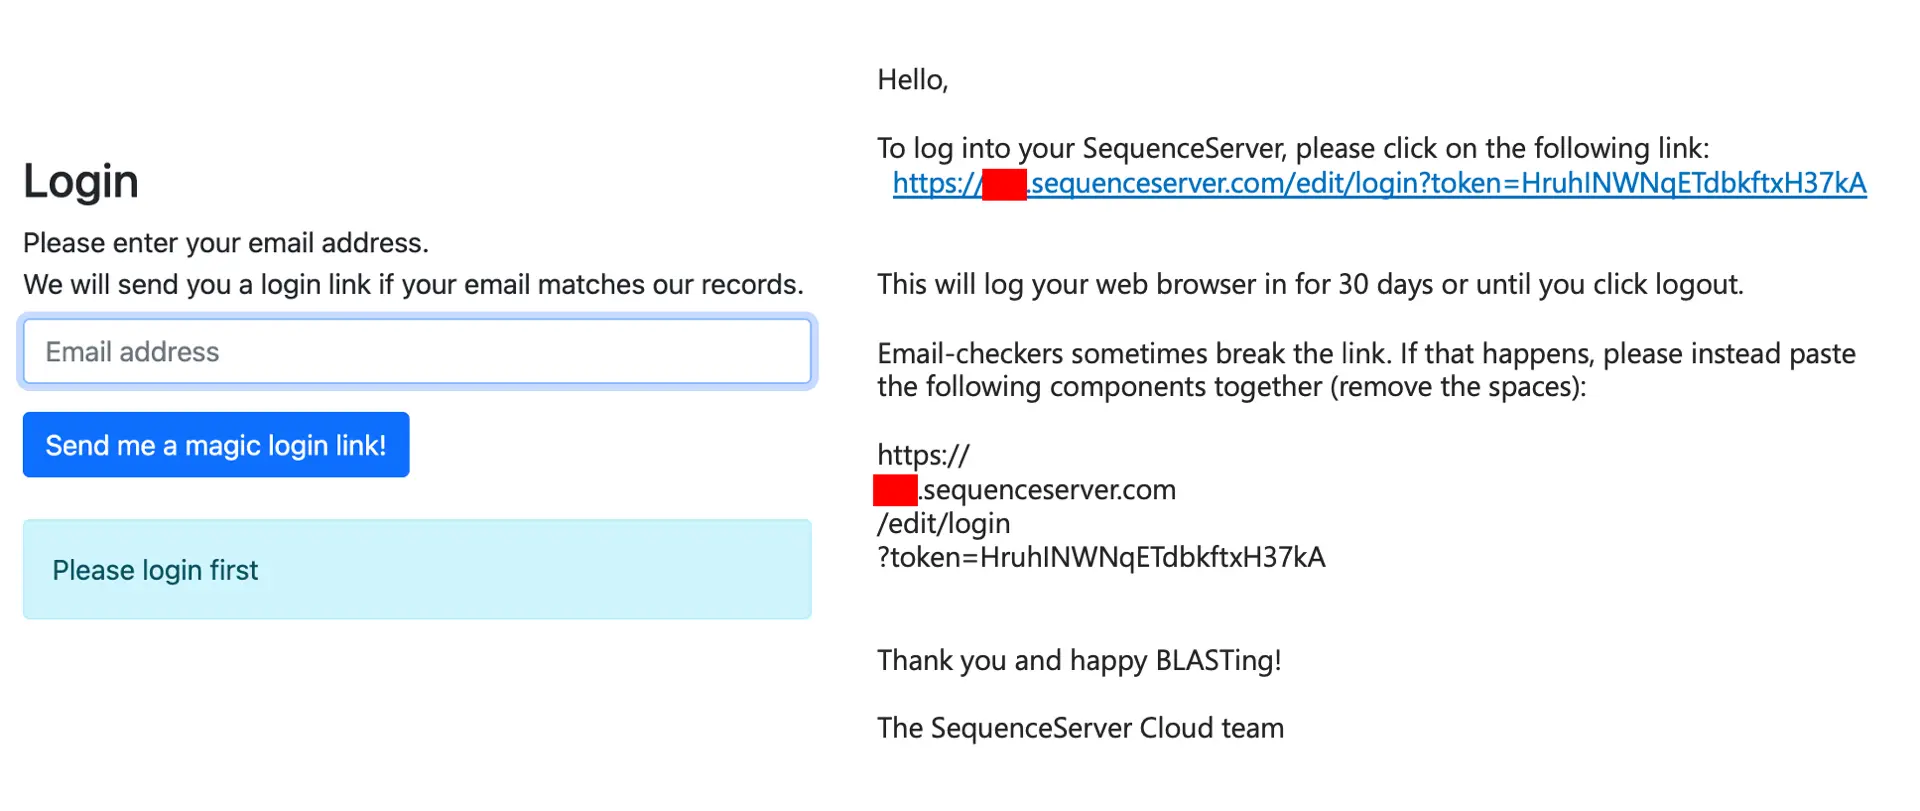 User request access emails provide a secure link to join the SequenceServer account